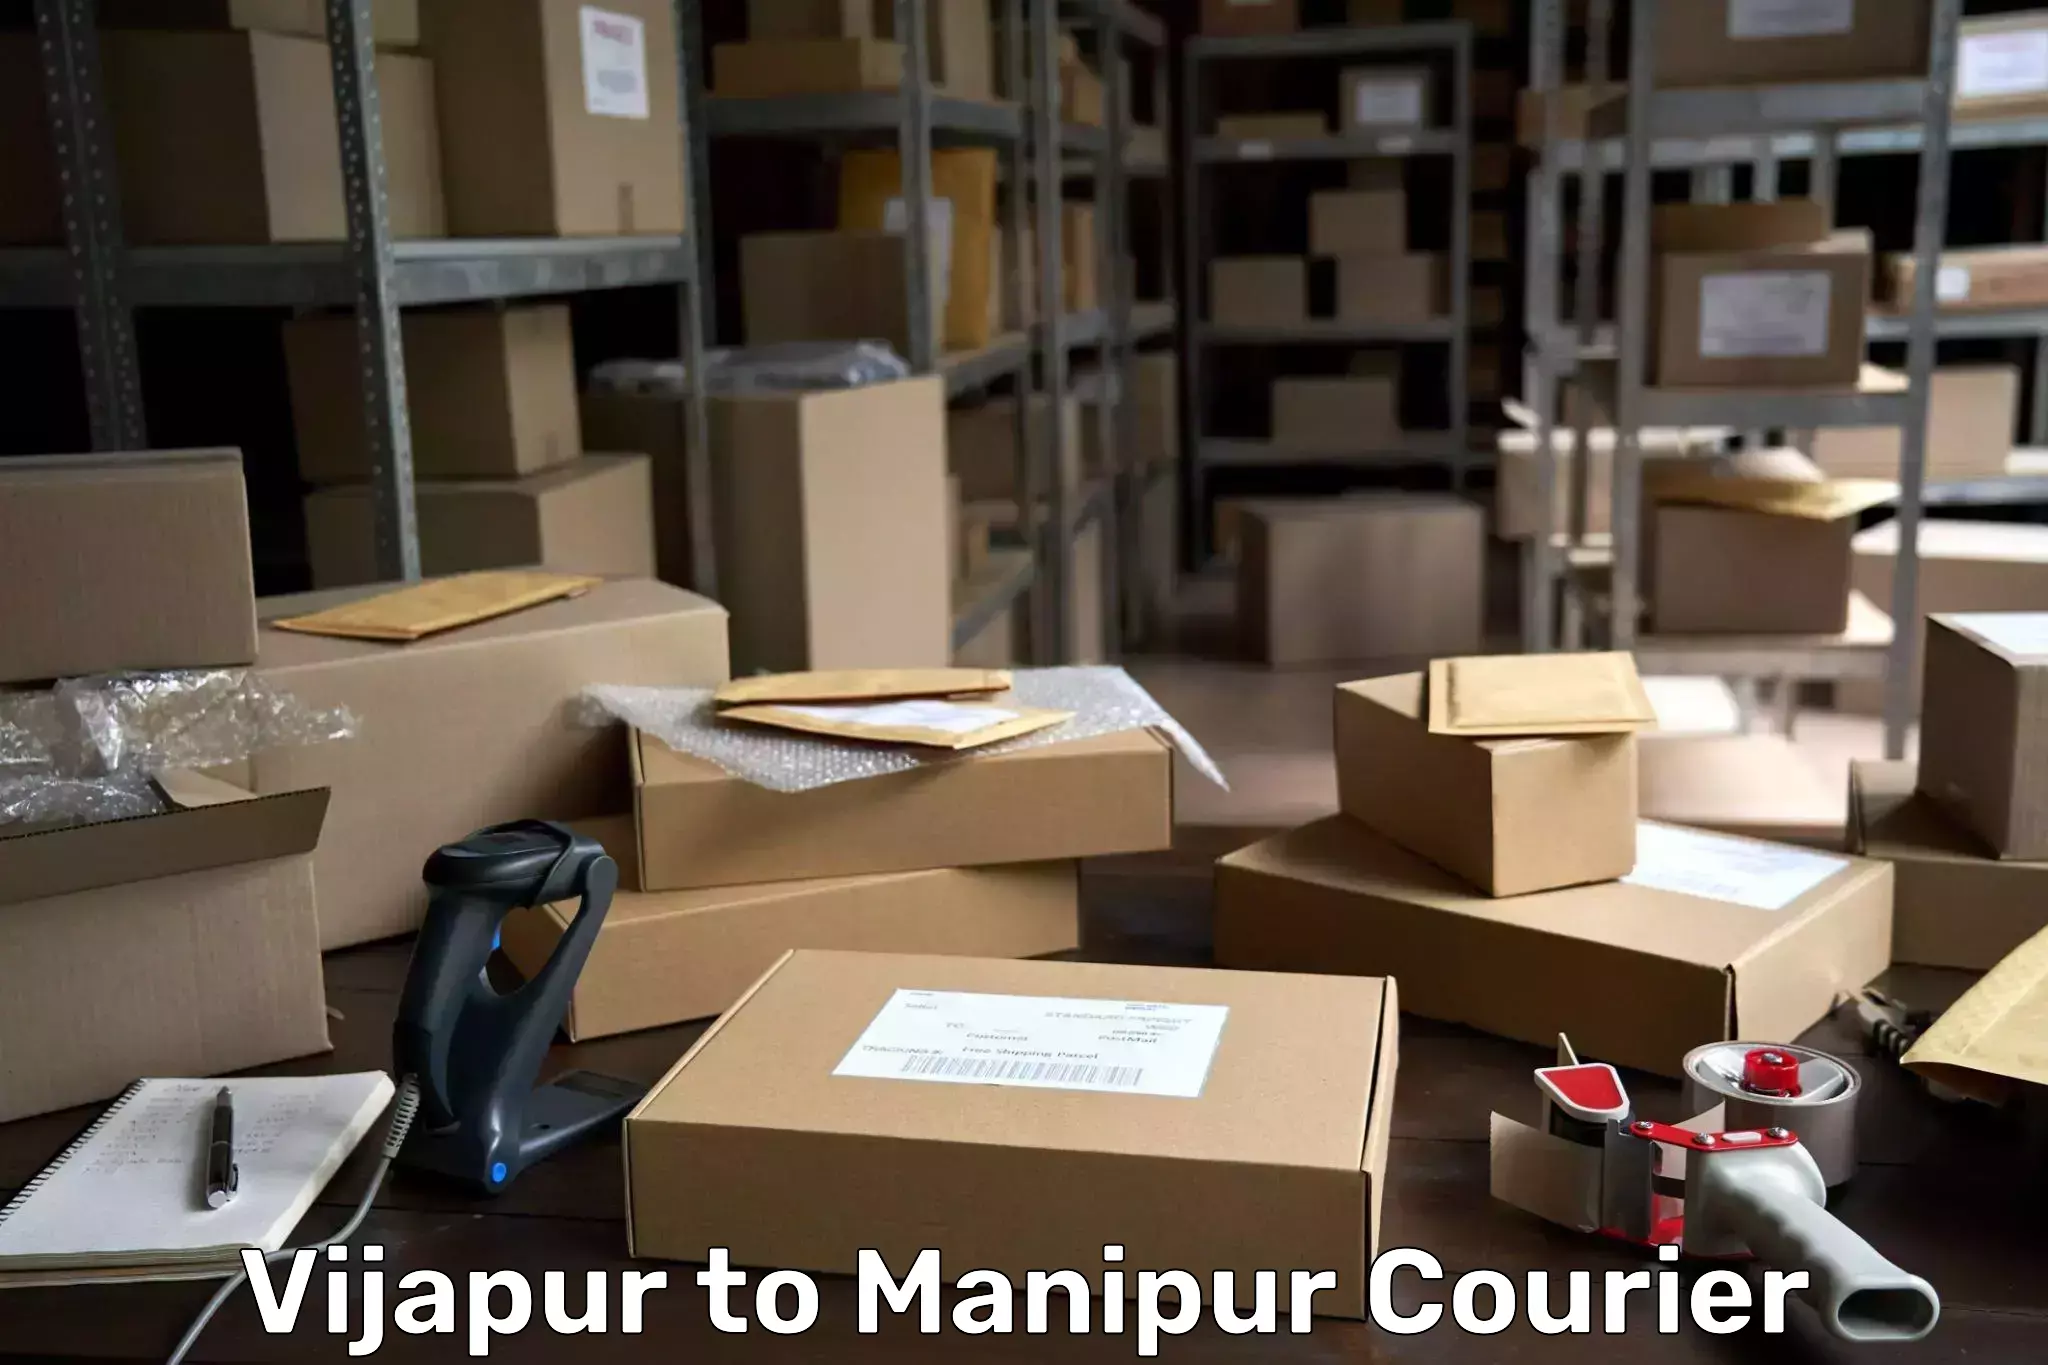 Global courier networks Vijapur to Manipur